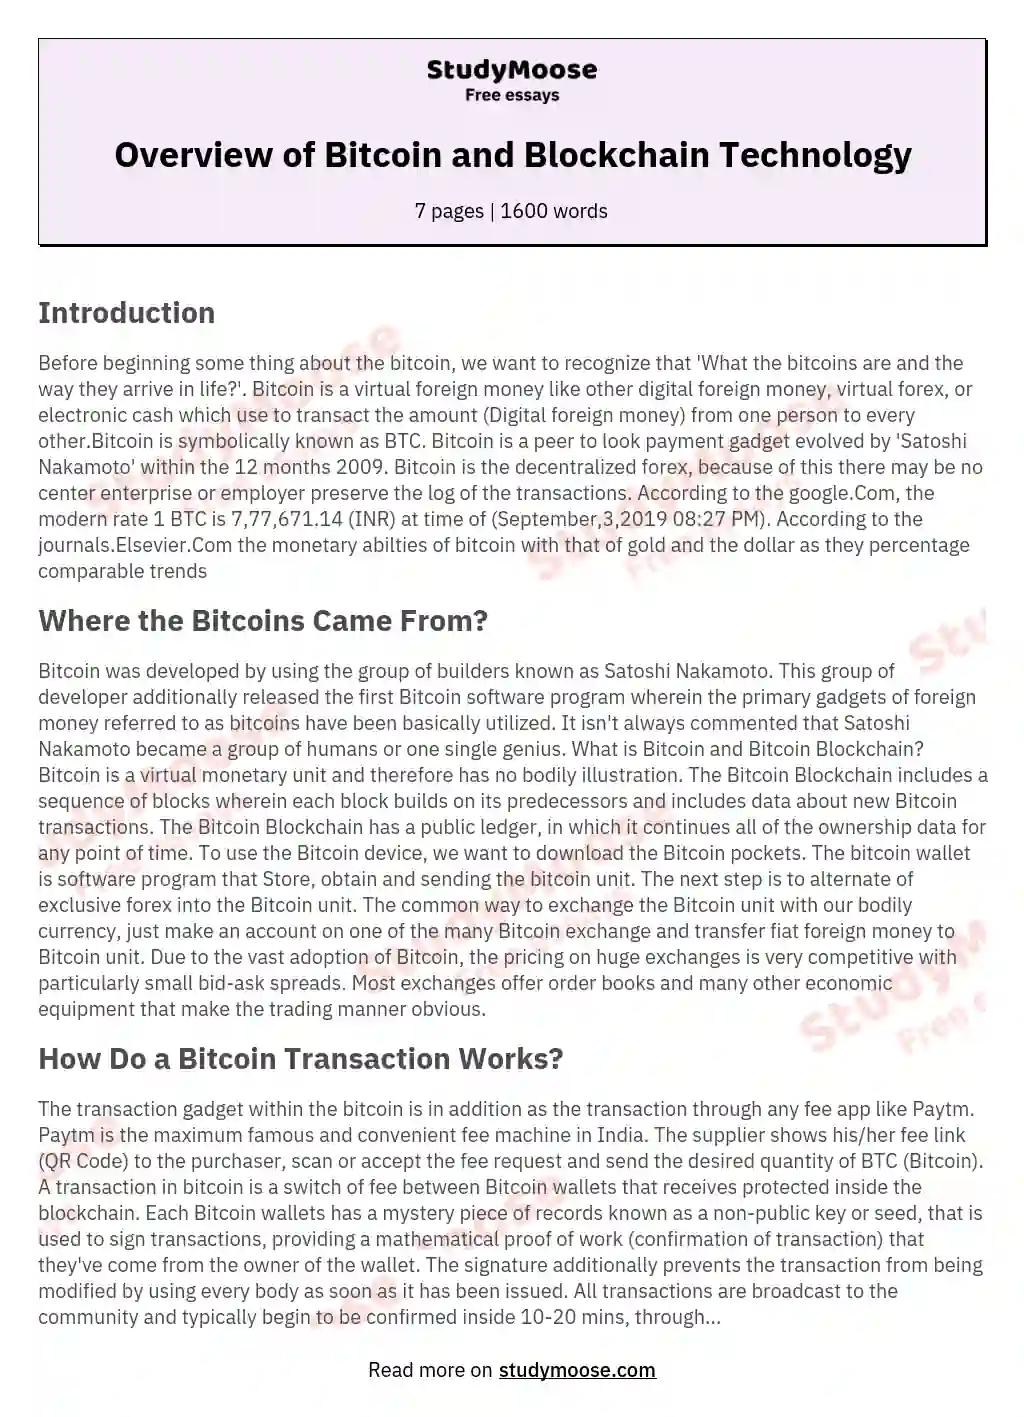 Overview of Bitcoin and Blockchain Technology essay